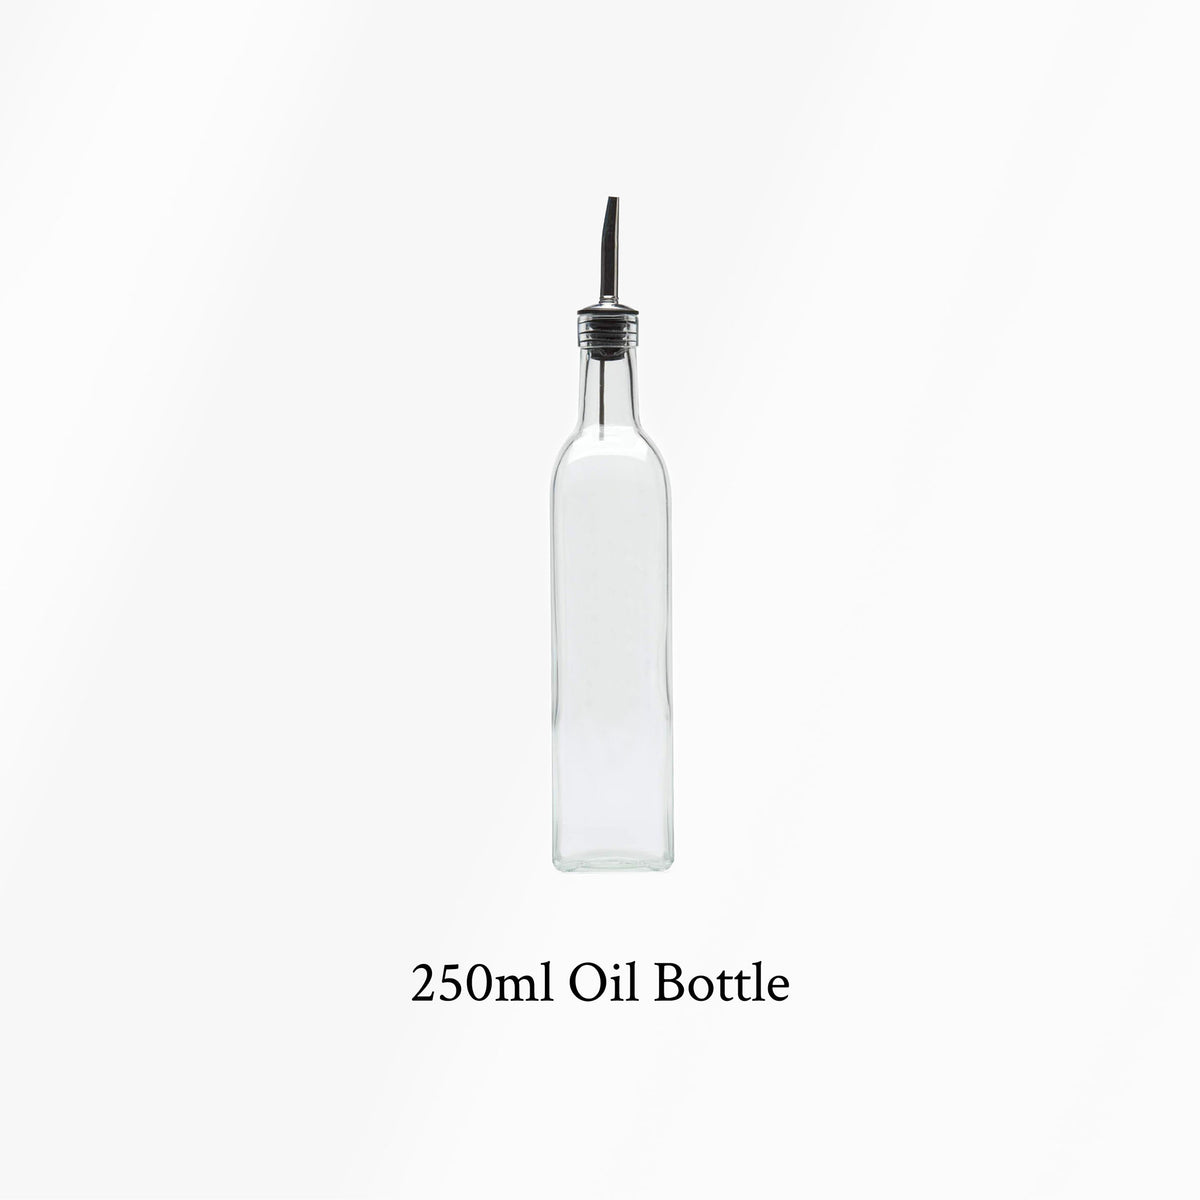 250ml Oil Bottle and Label